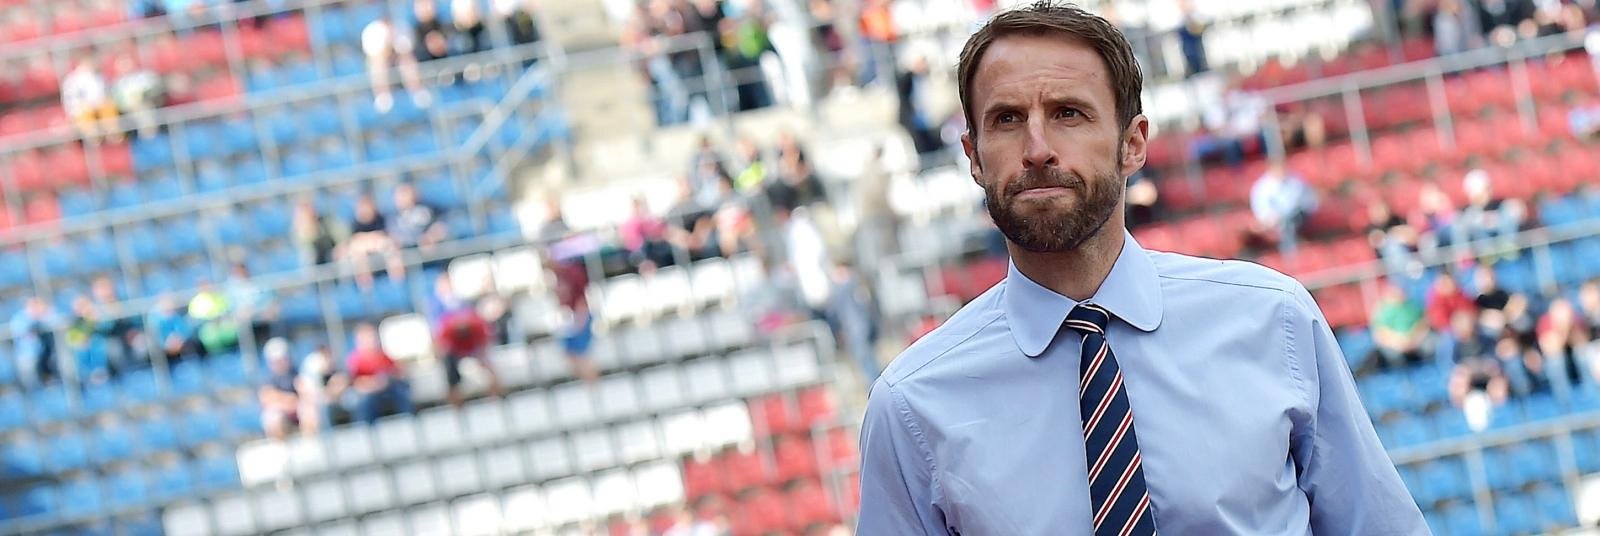 FA line up Gareth Southgate as interim England boss, but Arsenal’s Arsene Wenger is the long-term target